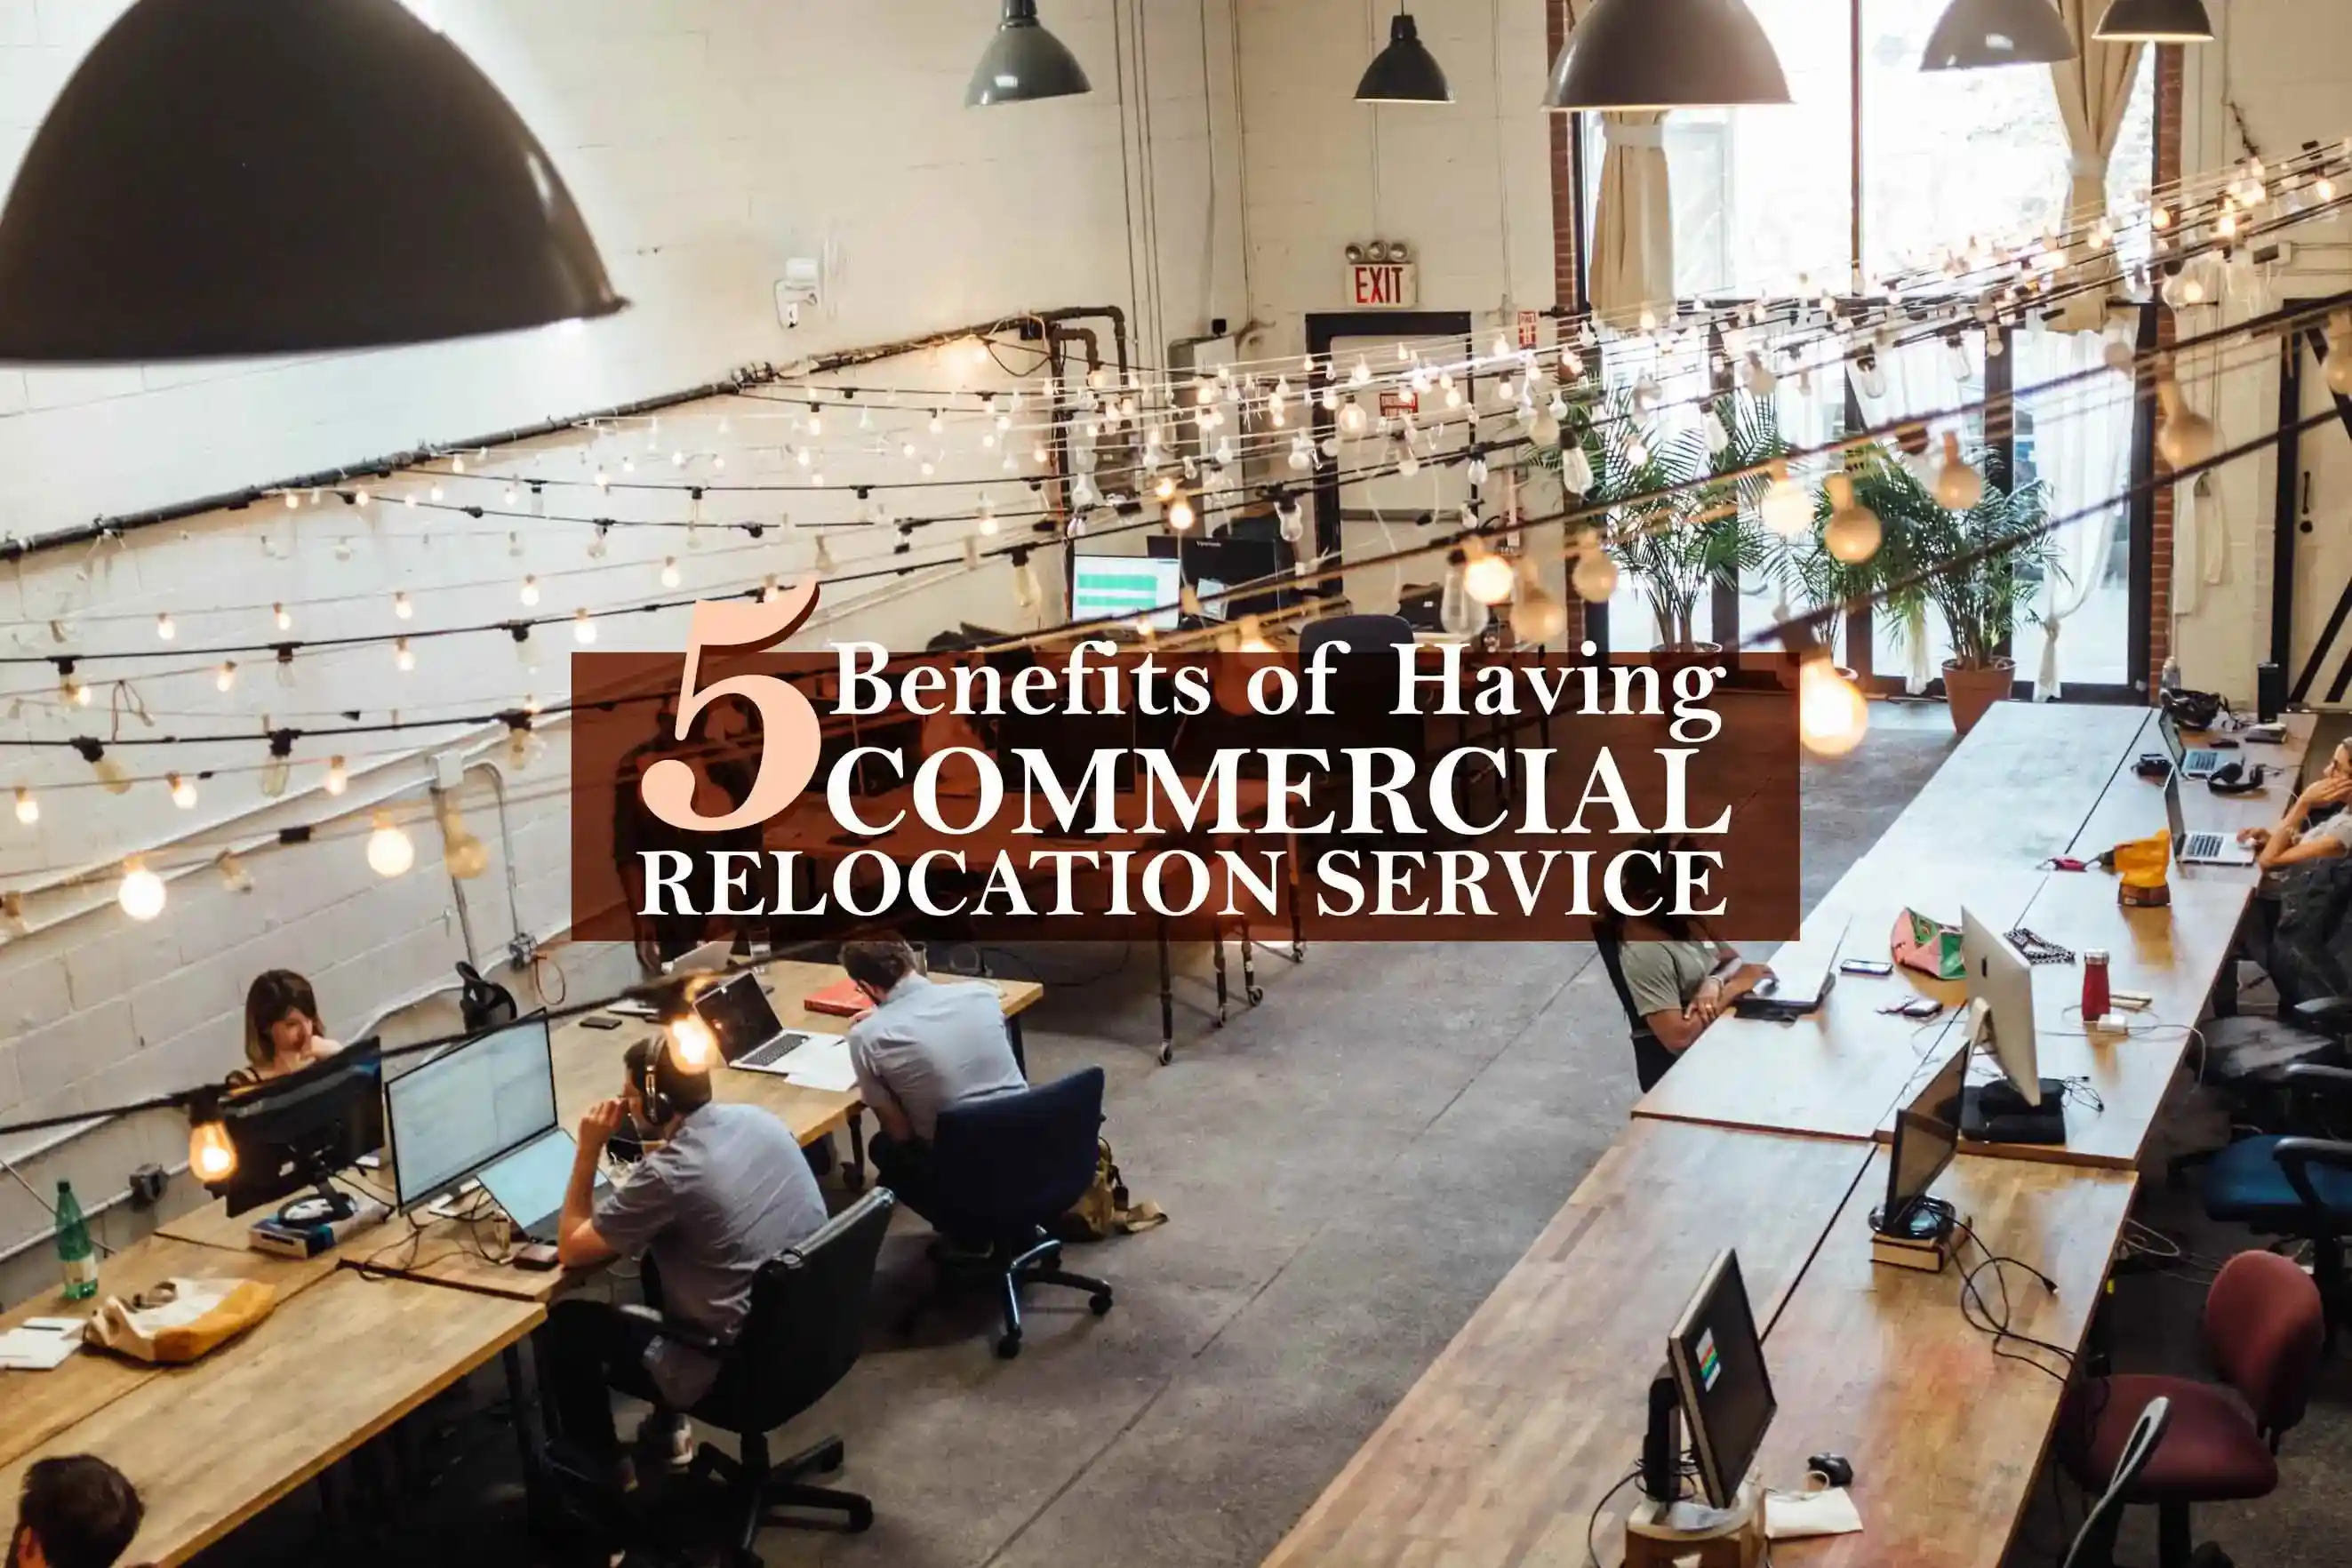 Benefits of Having Commercial Relocation Service